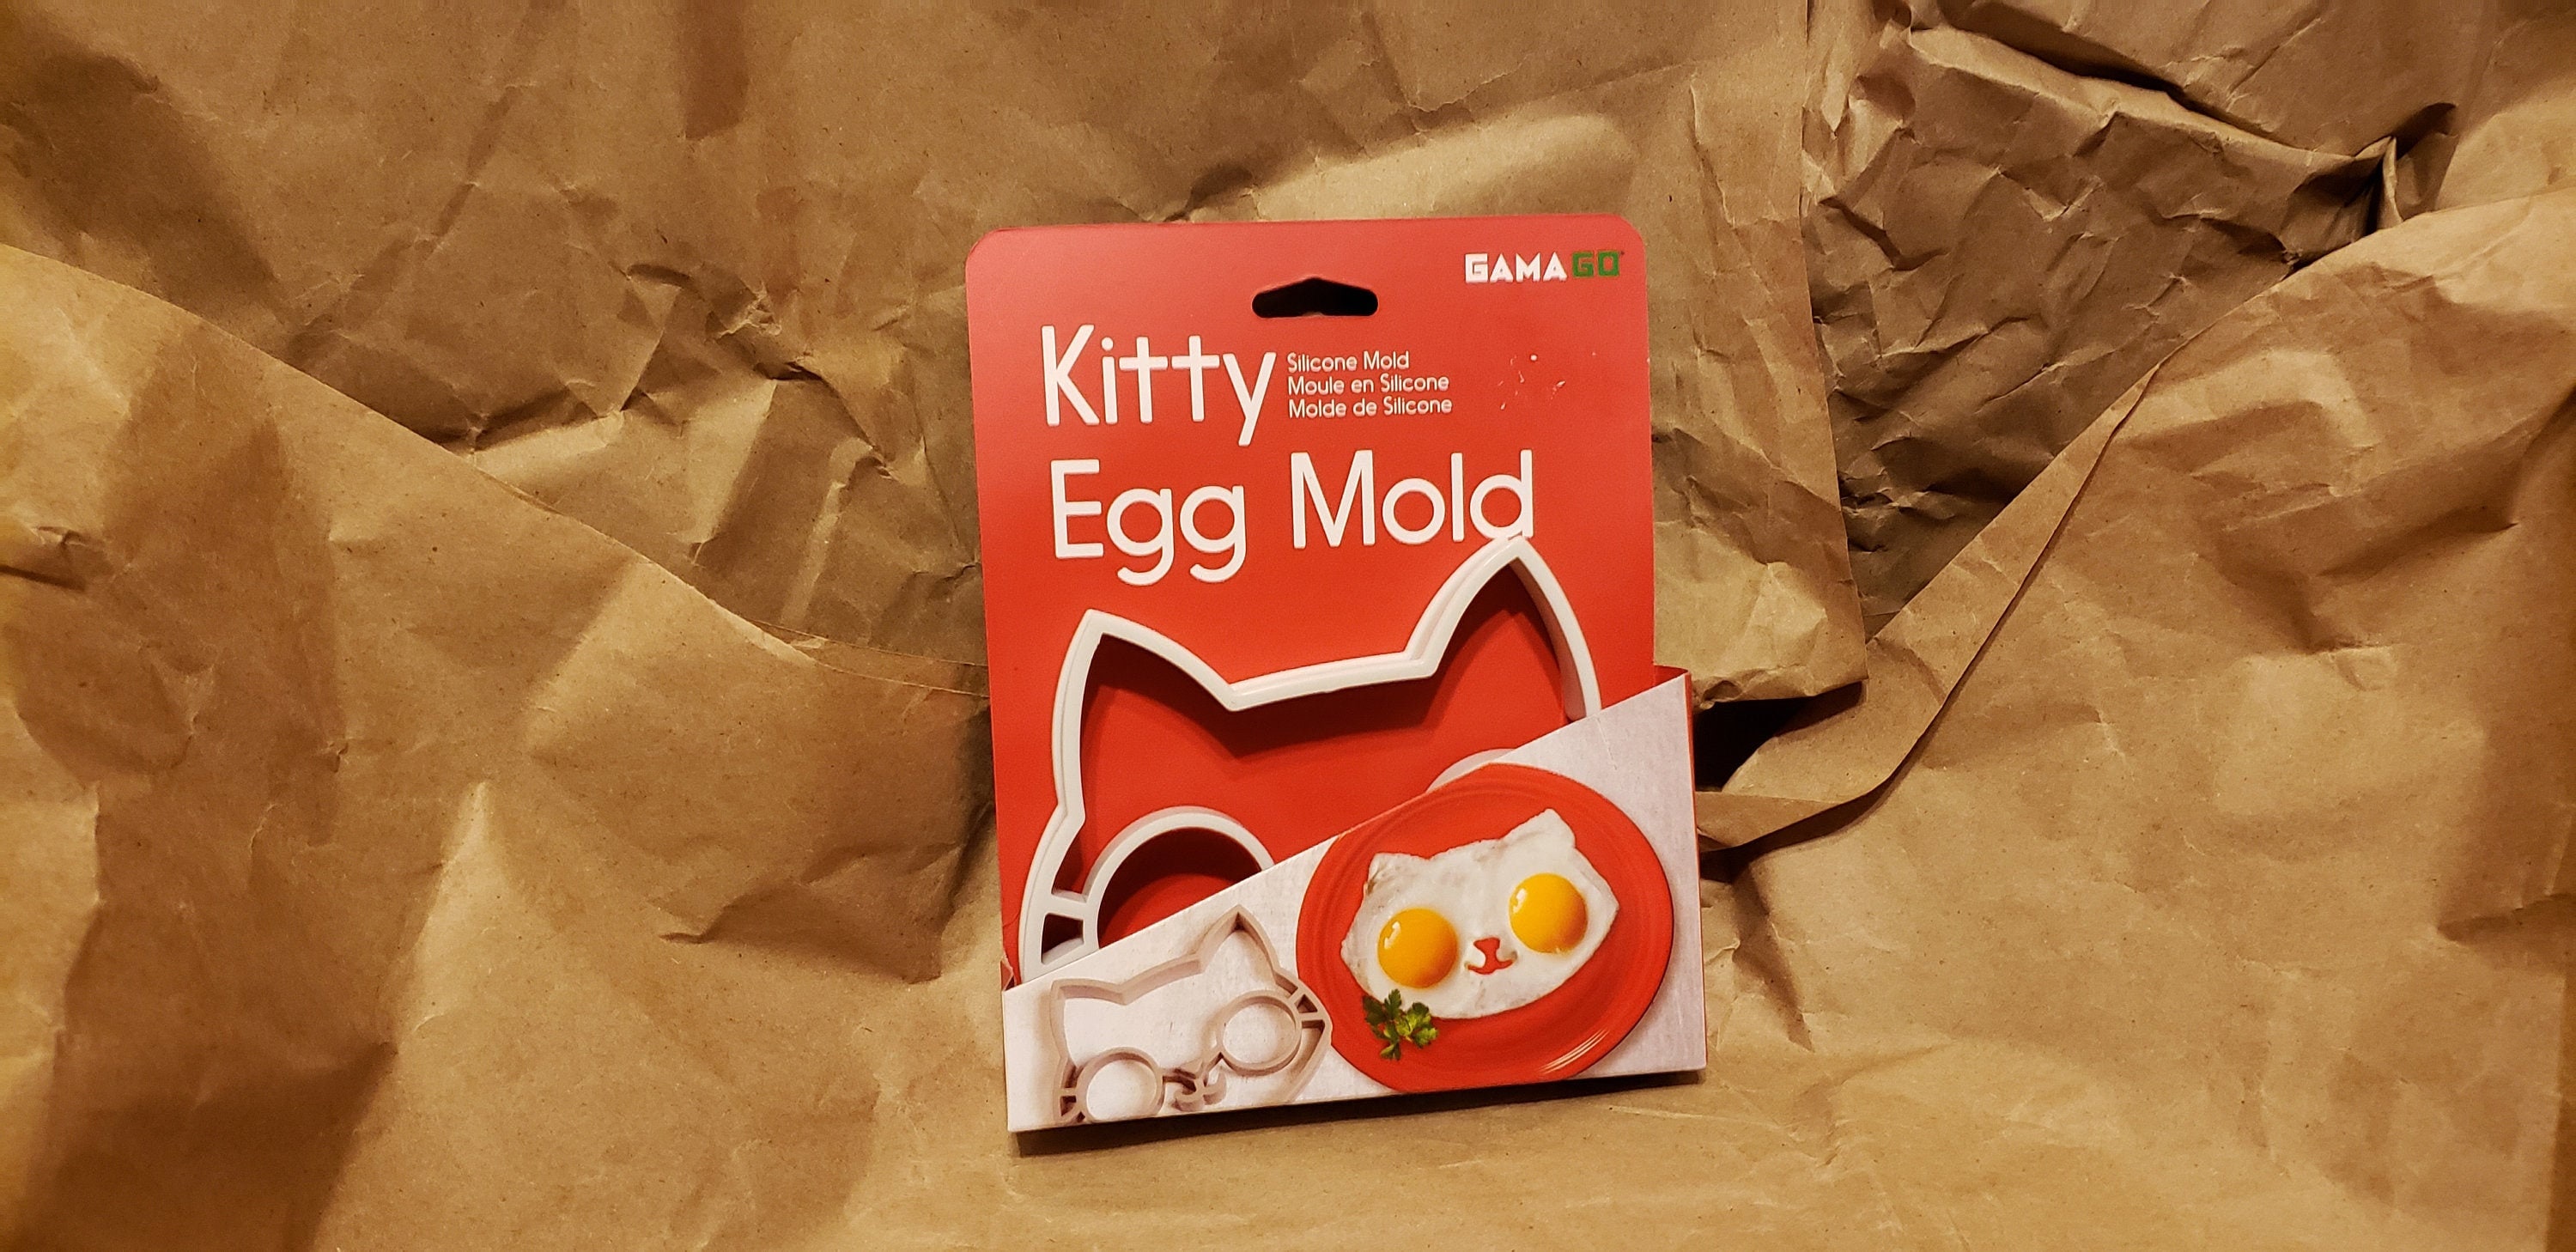 Kitty Silicone Breakfast Egg Mold - Cute Cat Shaped Egg Ring, Also